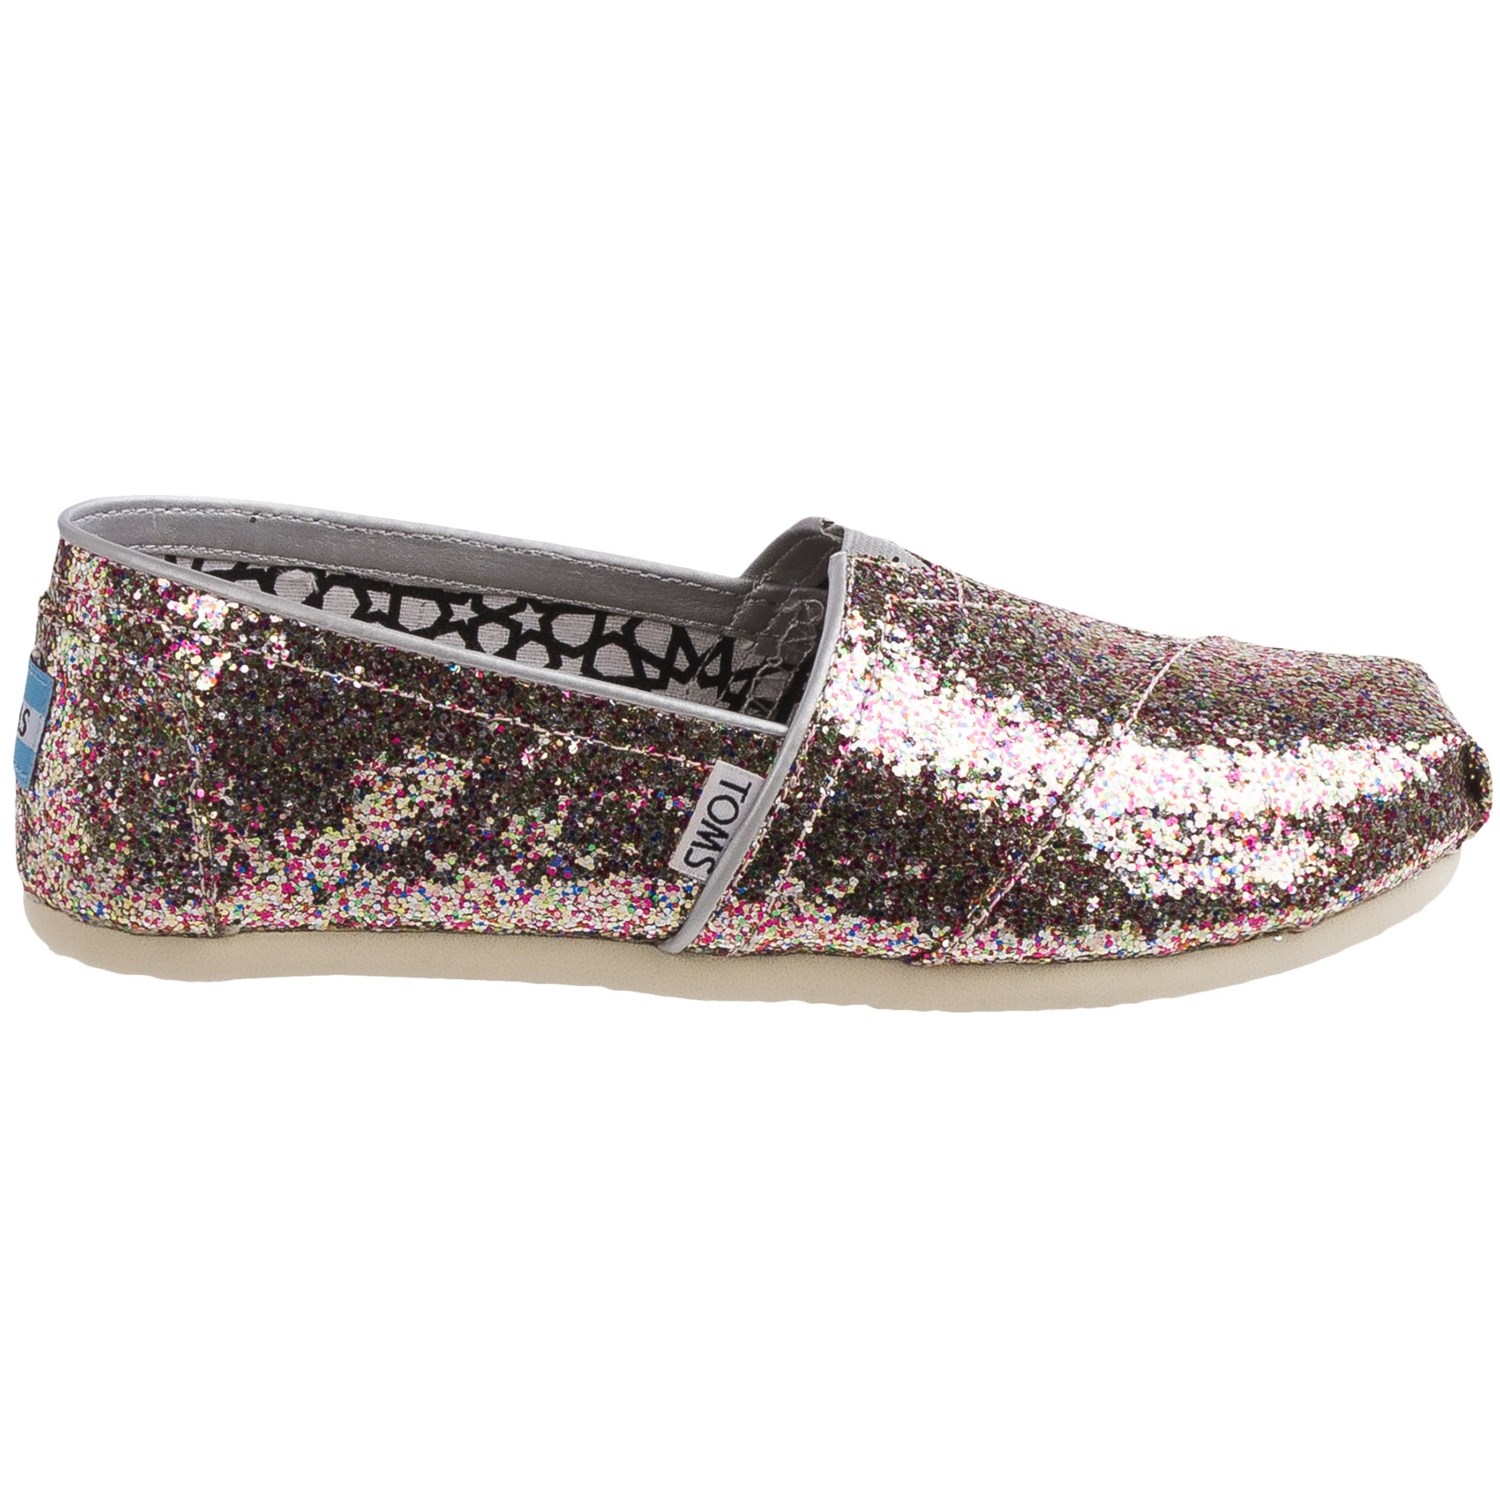 TOMS Classic Multi Glitter Shoes (For Women)